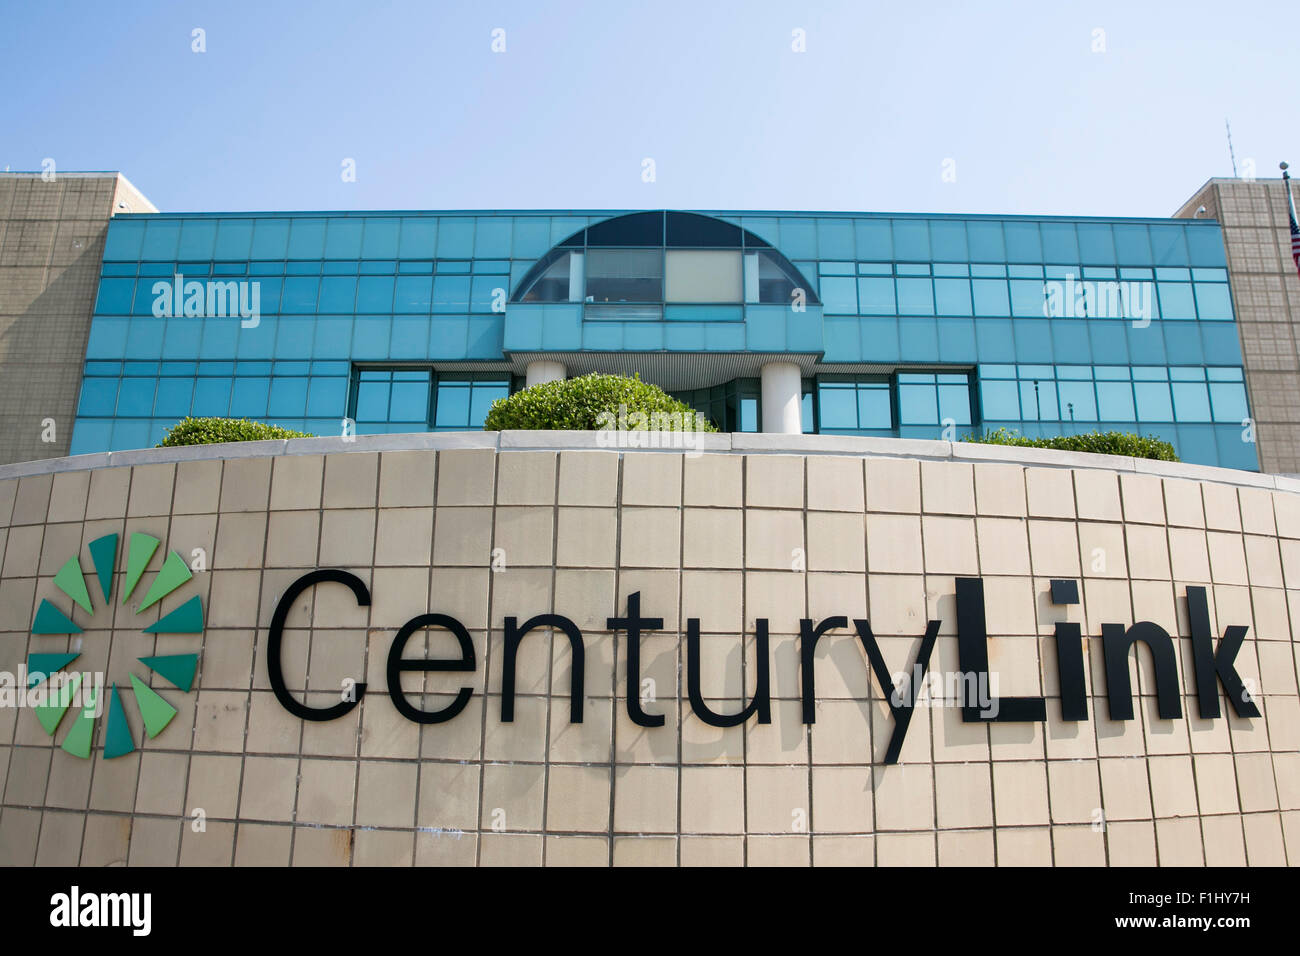 A logo sign outside of a facility occupied by CenturyLink, Inc., in New Century, Kansas, on August 22, 2015. Stock Photo